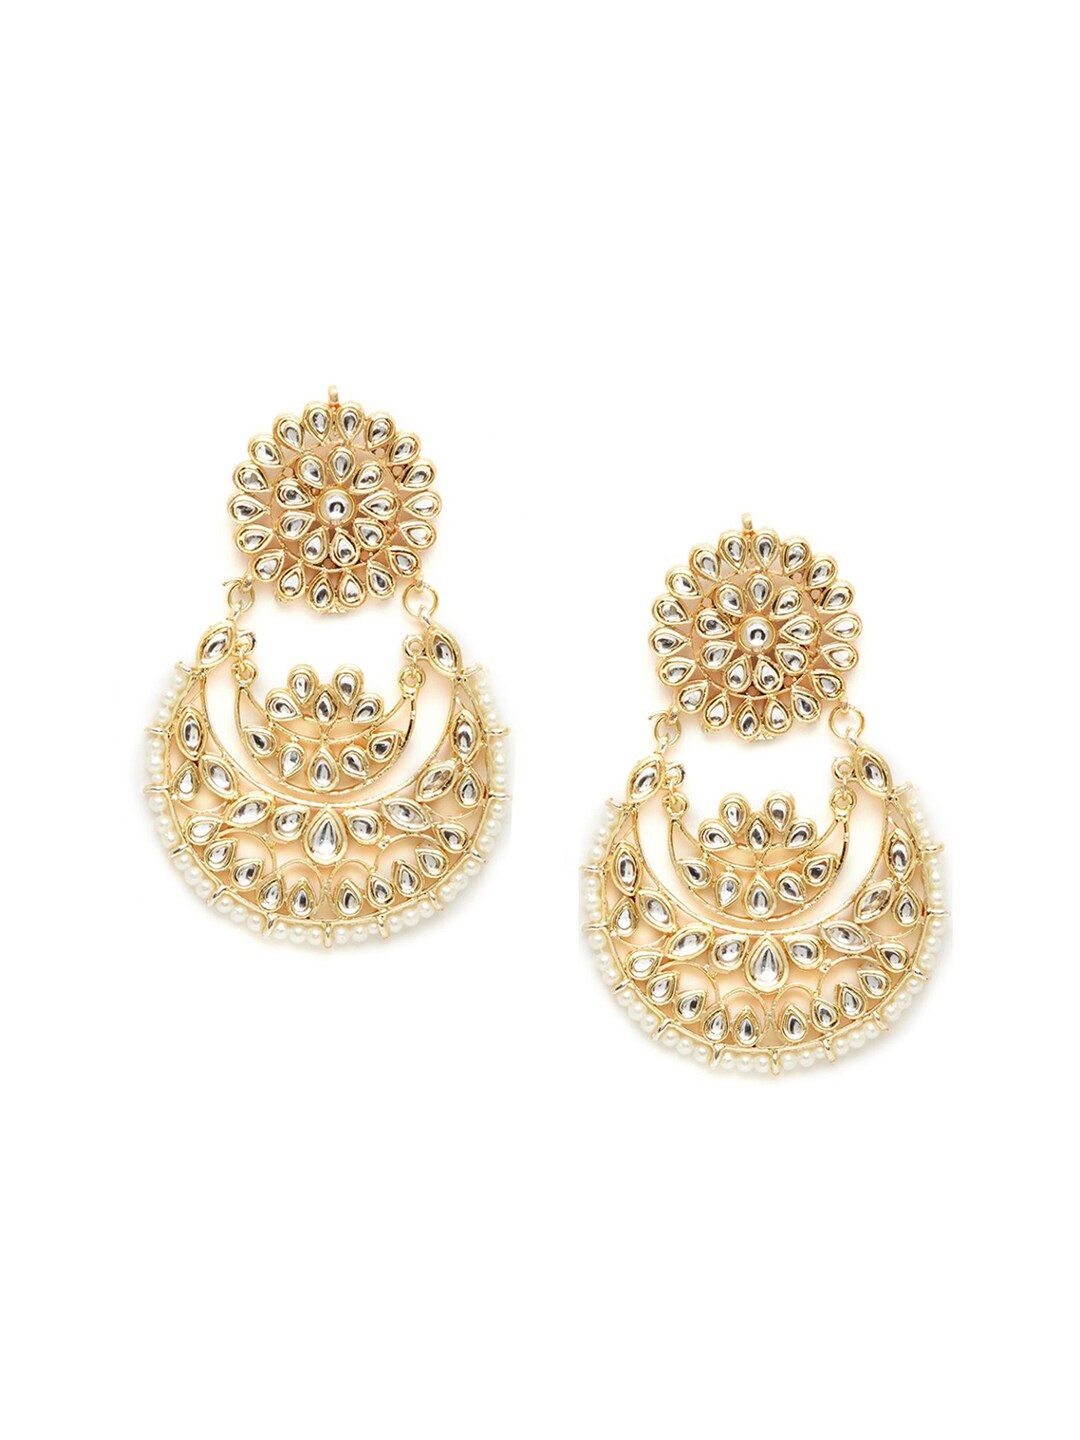 Bamboo Tree Jewels Gold-Toned Contemporary Chandbalis Earrings Price in India